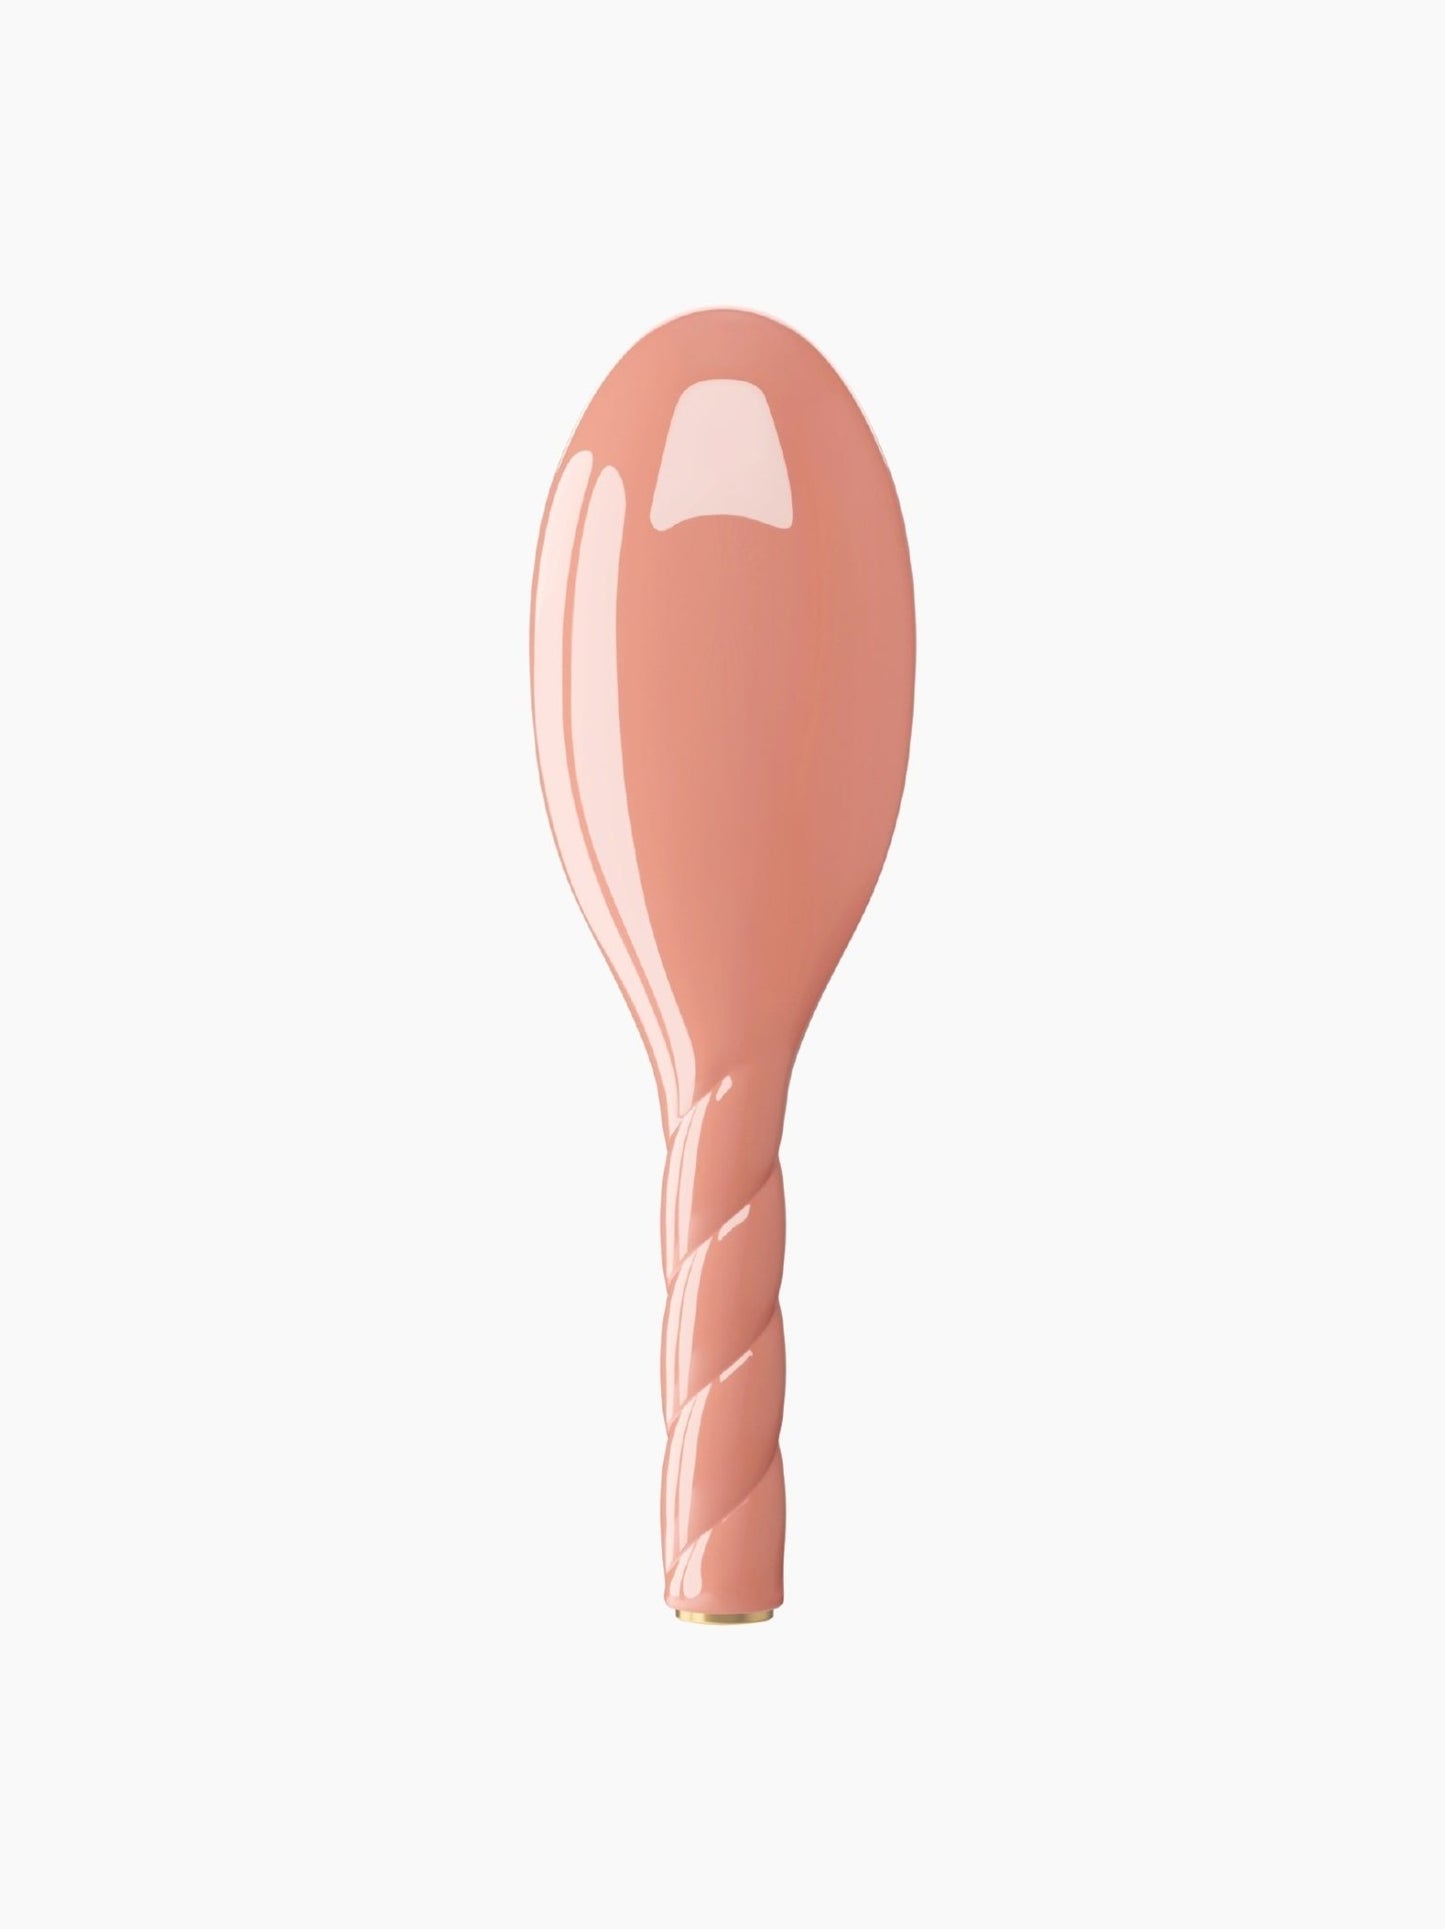 The Essential Hairbrush Coral